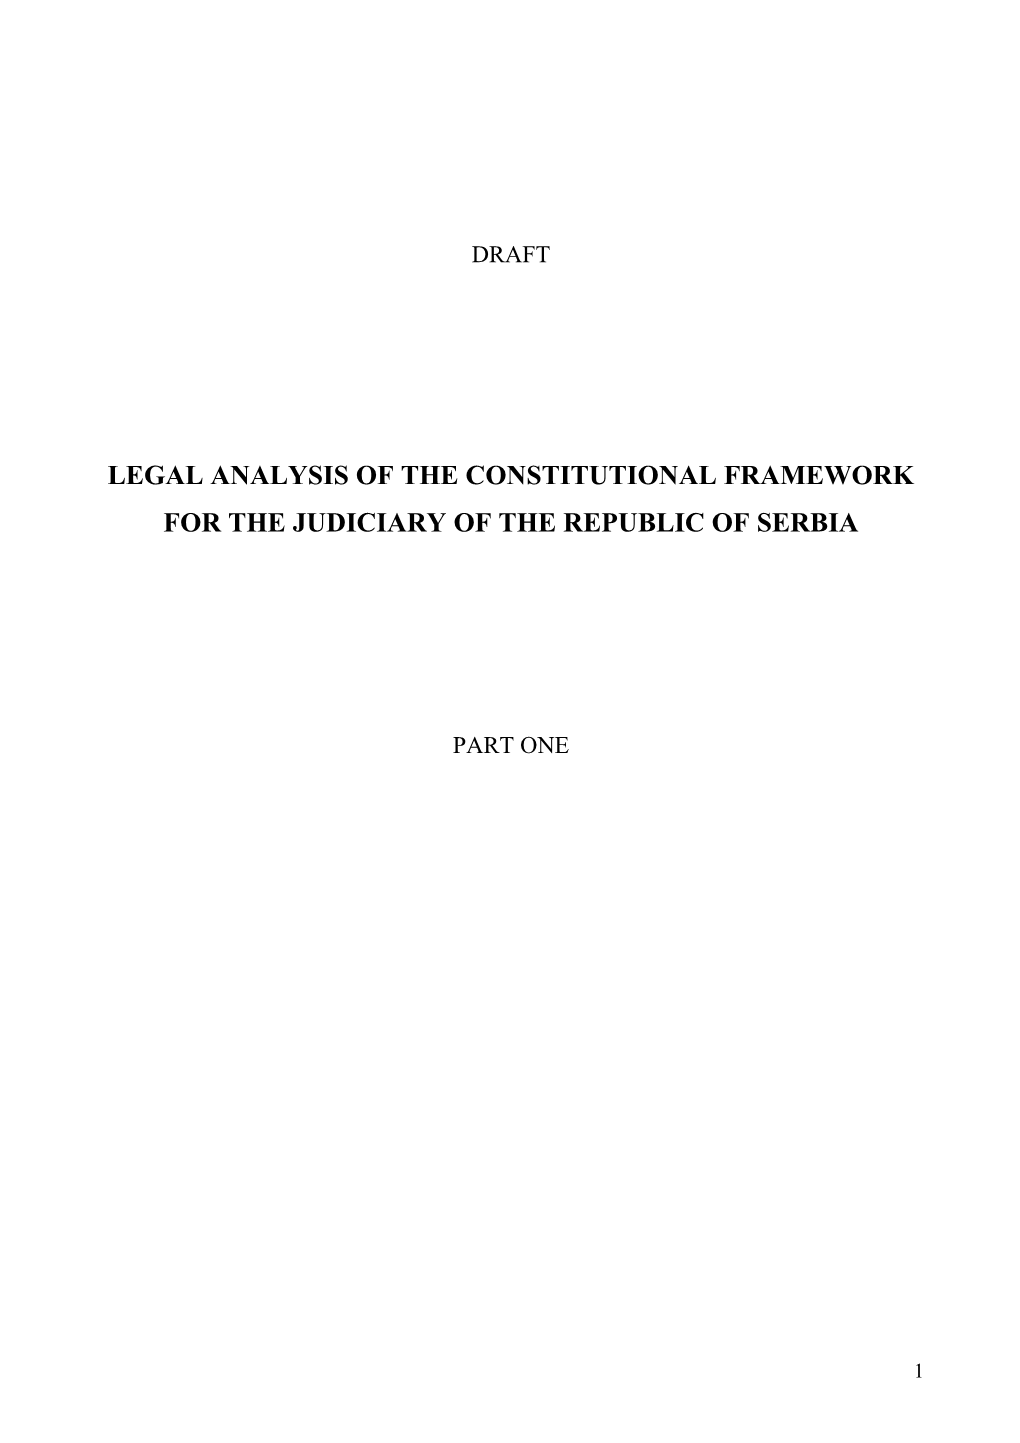 Legal Analysis of the Constitutional Framework for the Judiciaryof the Republic of Serbia